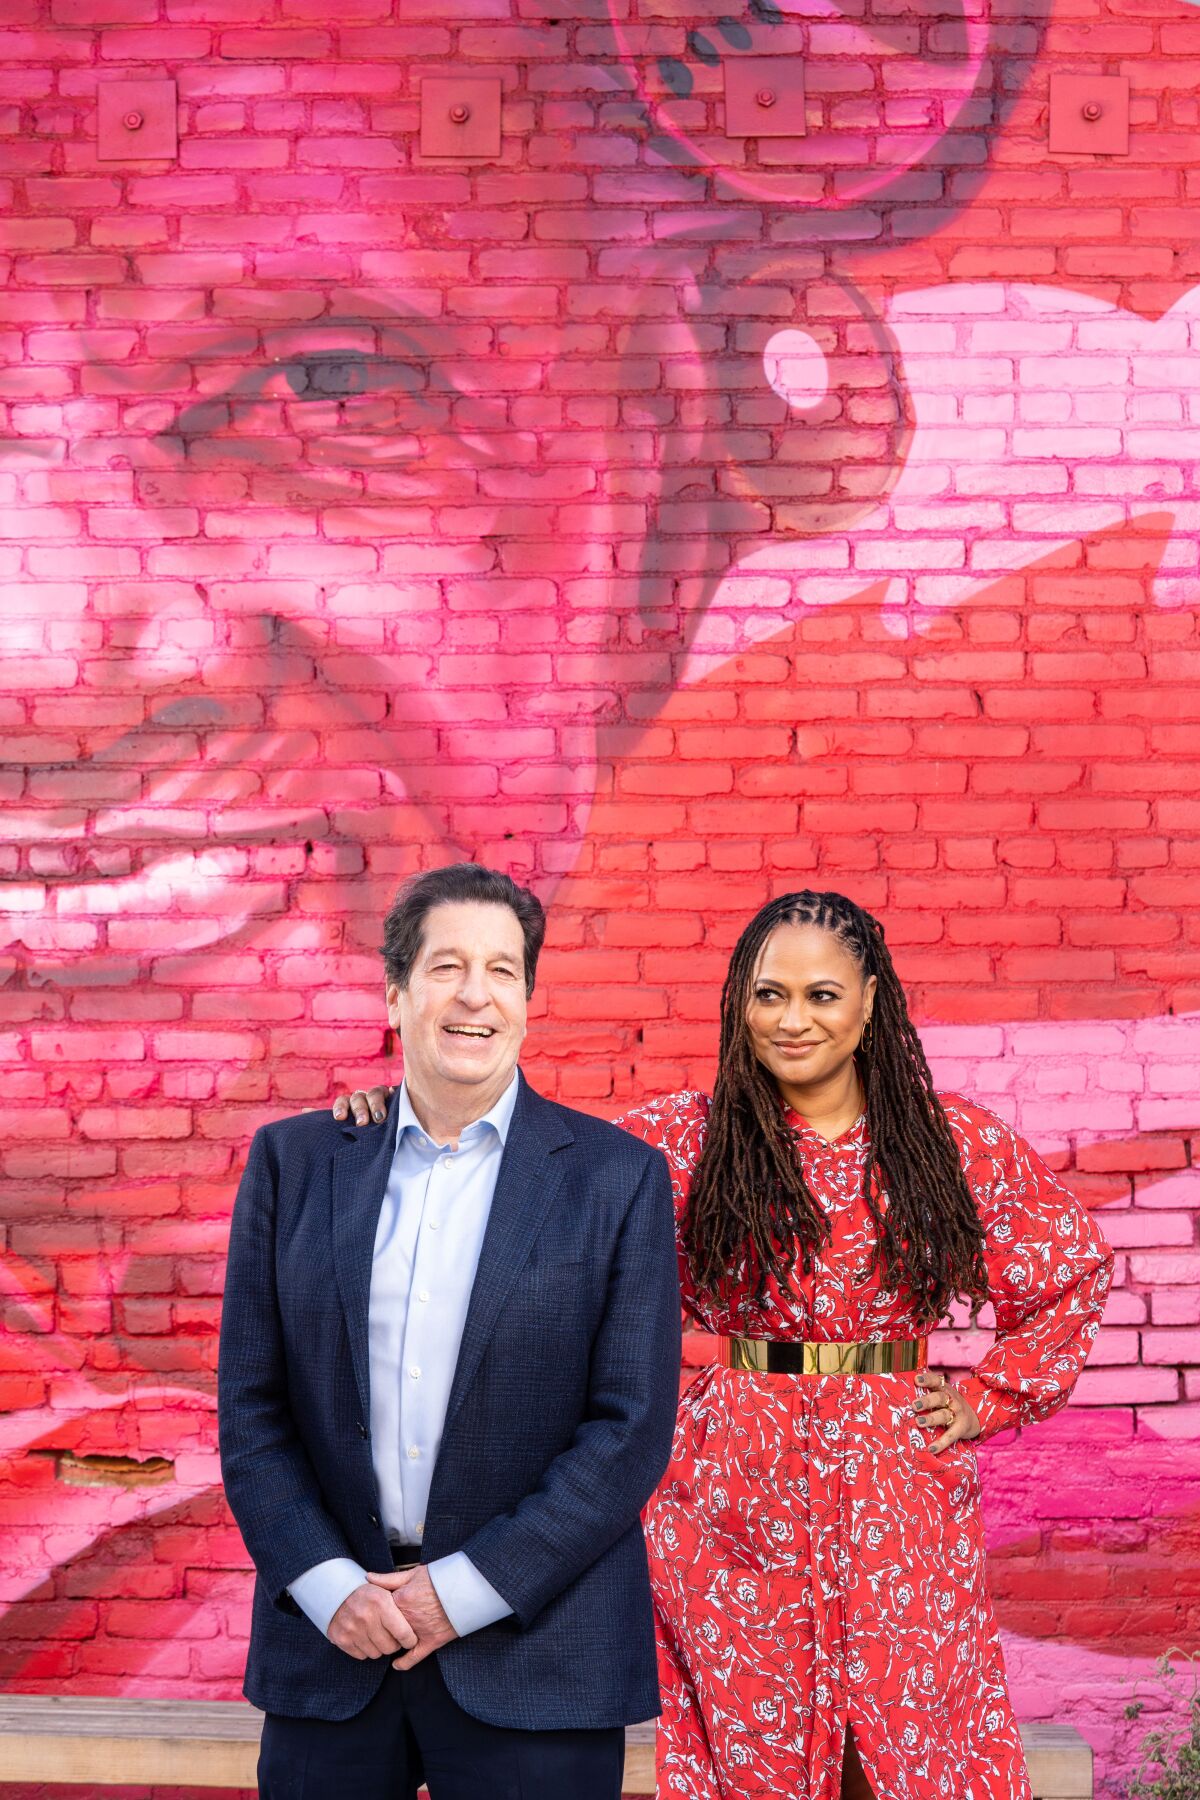 Outgoing Warner Bros. TV executive Peter Roth and filmmaker Ava Duvernay